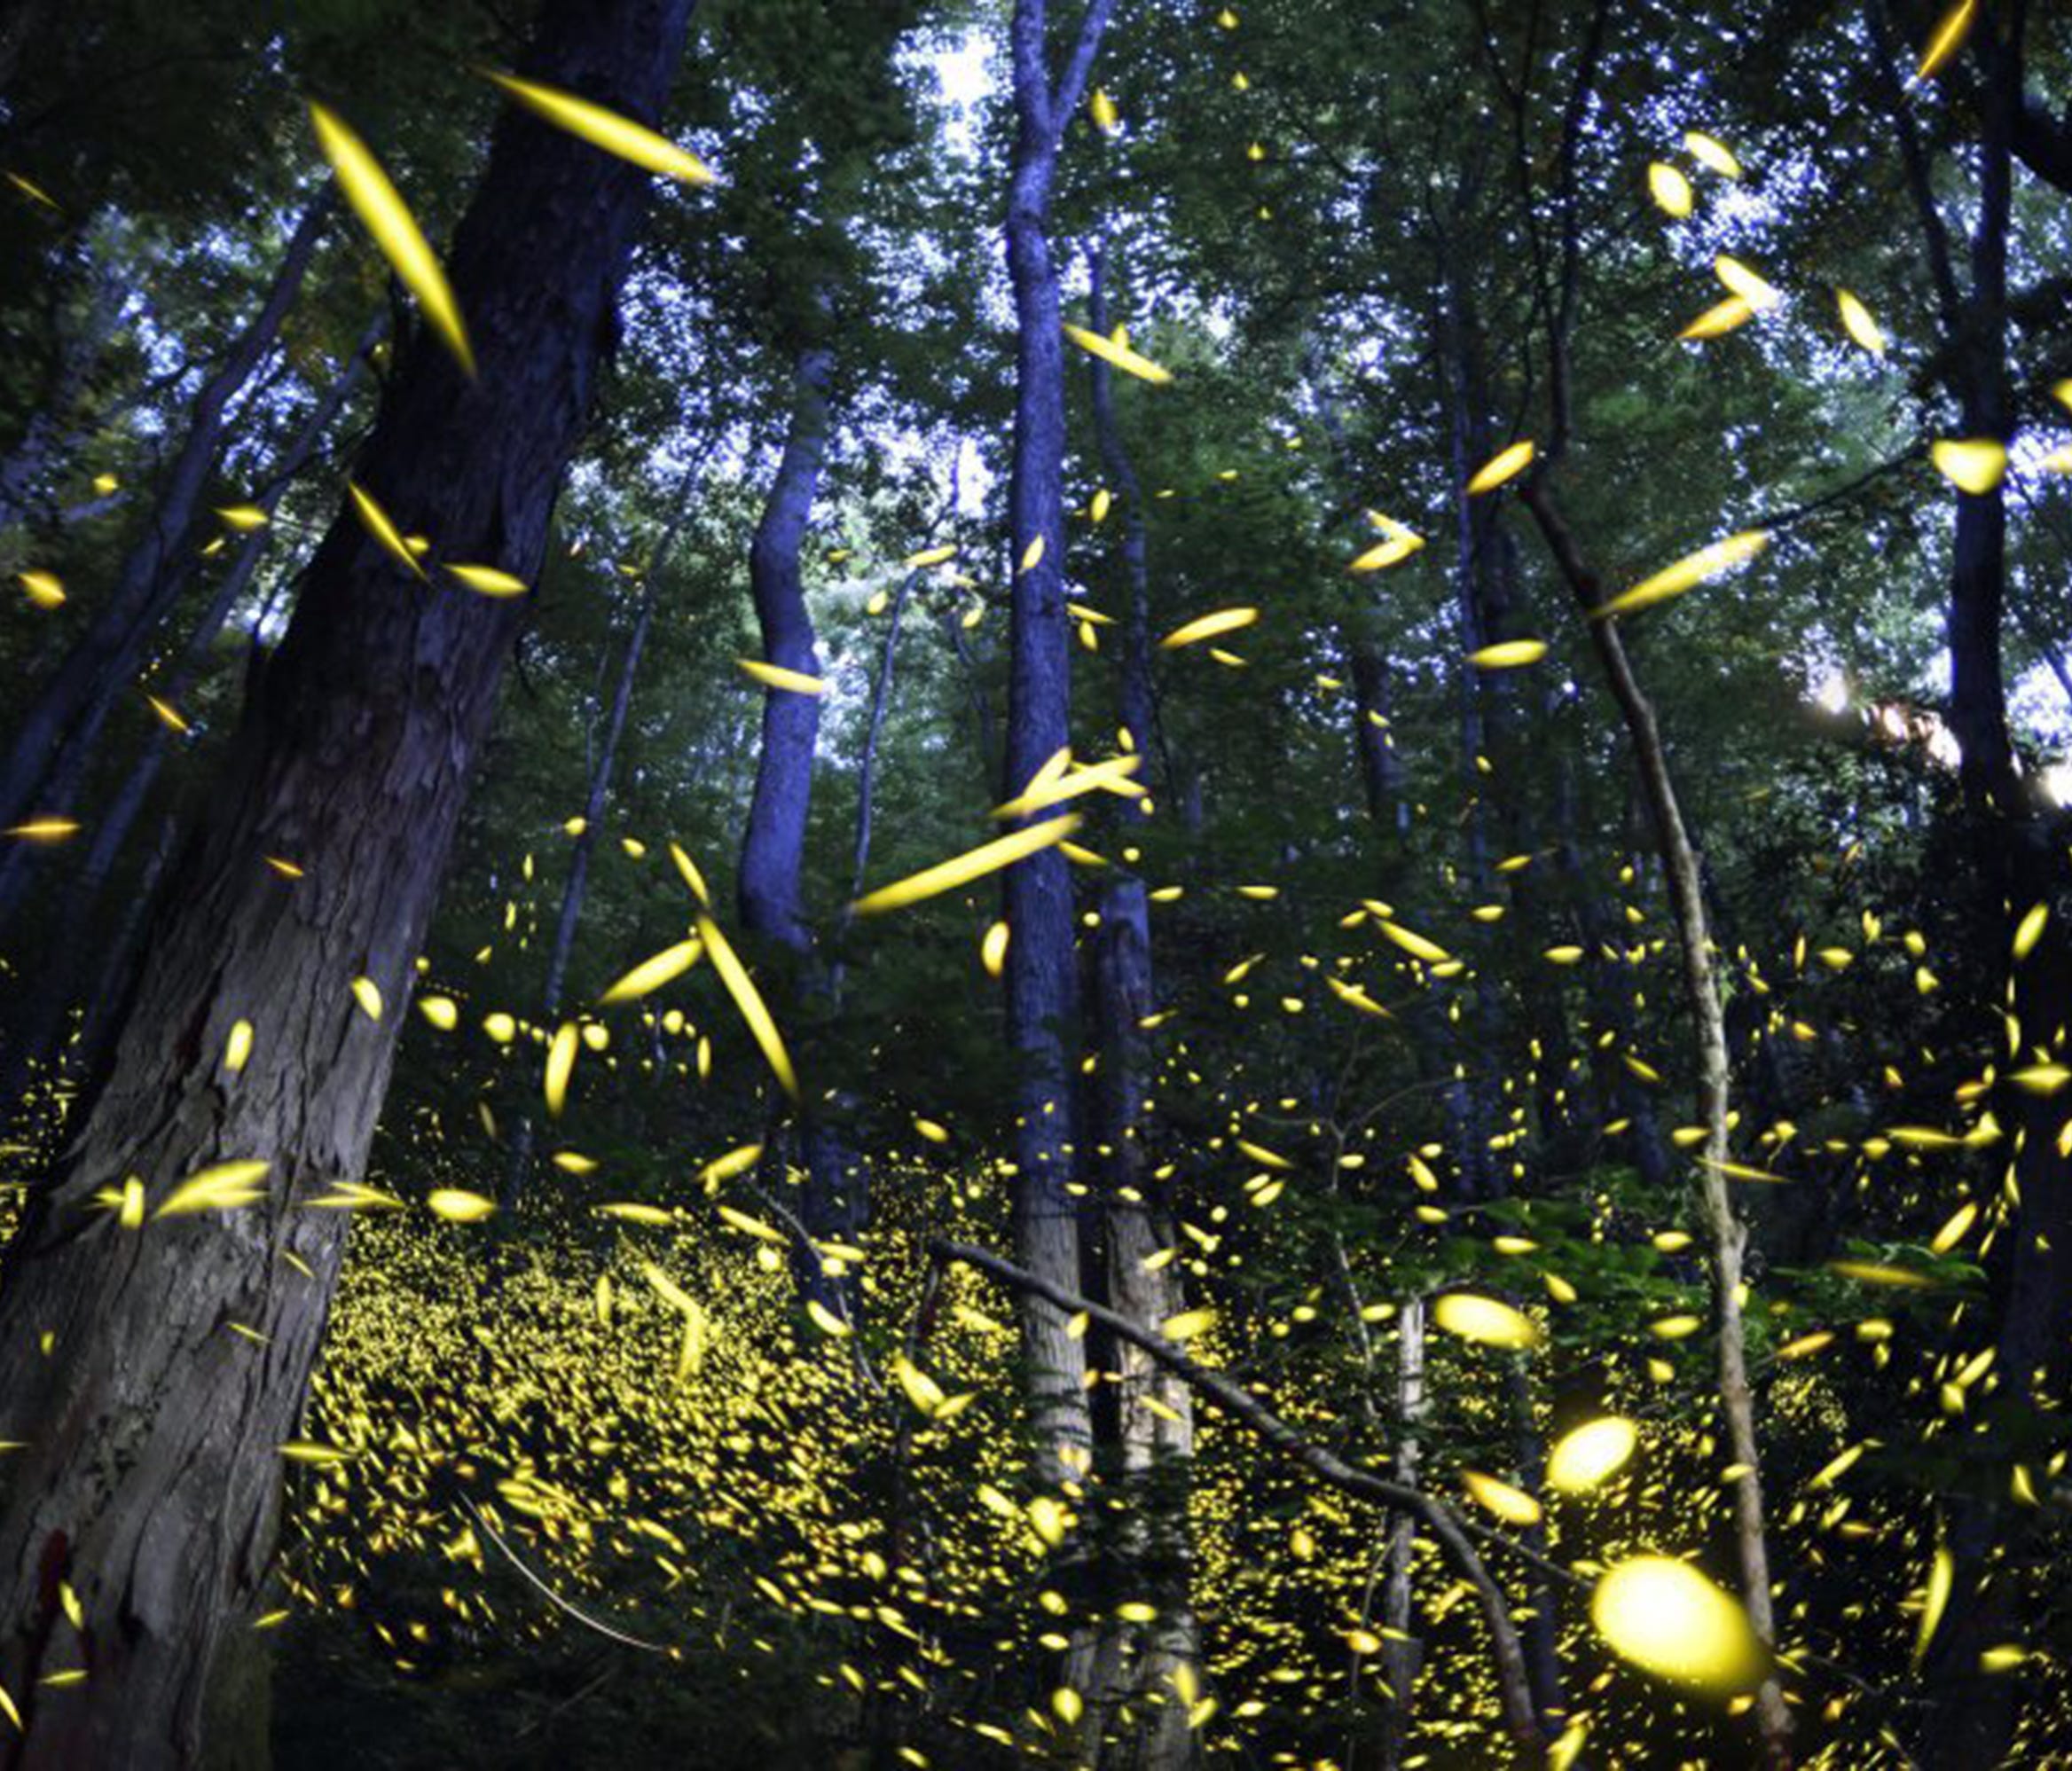 Synchronous fireflies fill the air June 3, 2014, for their annual mating season at Elkmont in the Tennessee portion of the Great Smoky Mountains National Park.